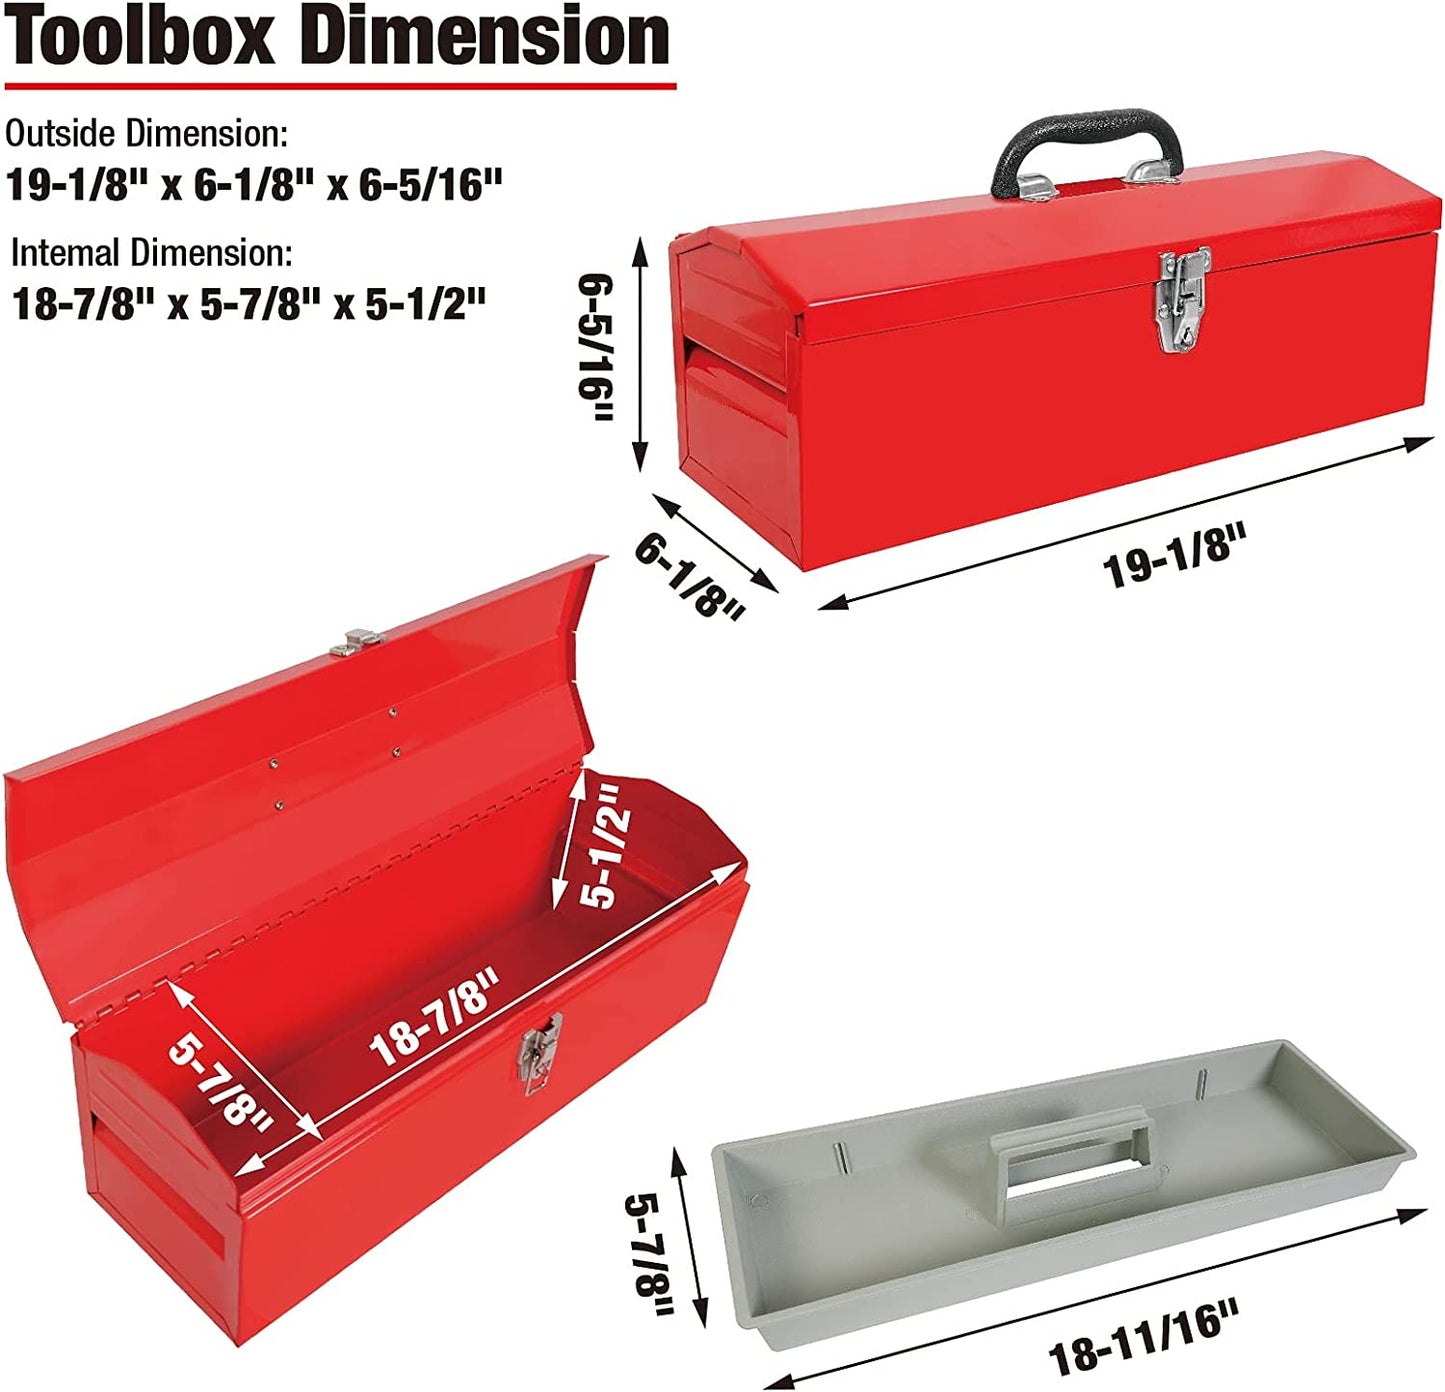 19" Steel Portable Tool Box Organizer with Metal Latch Closure and Removable Storage Tray, Red